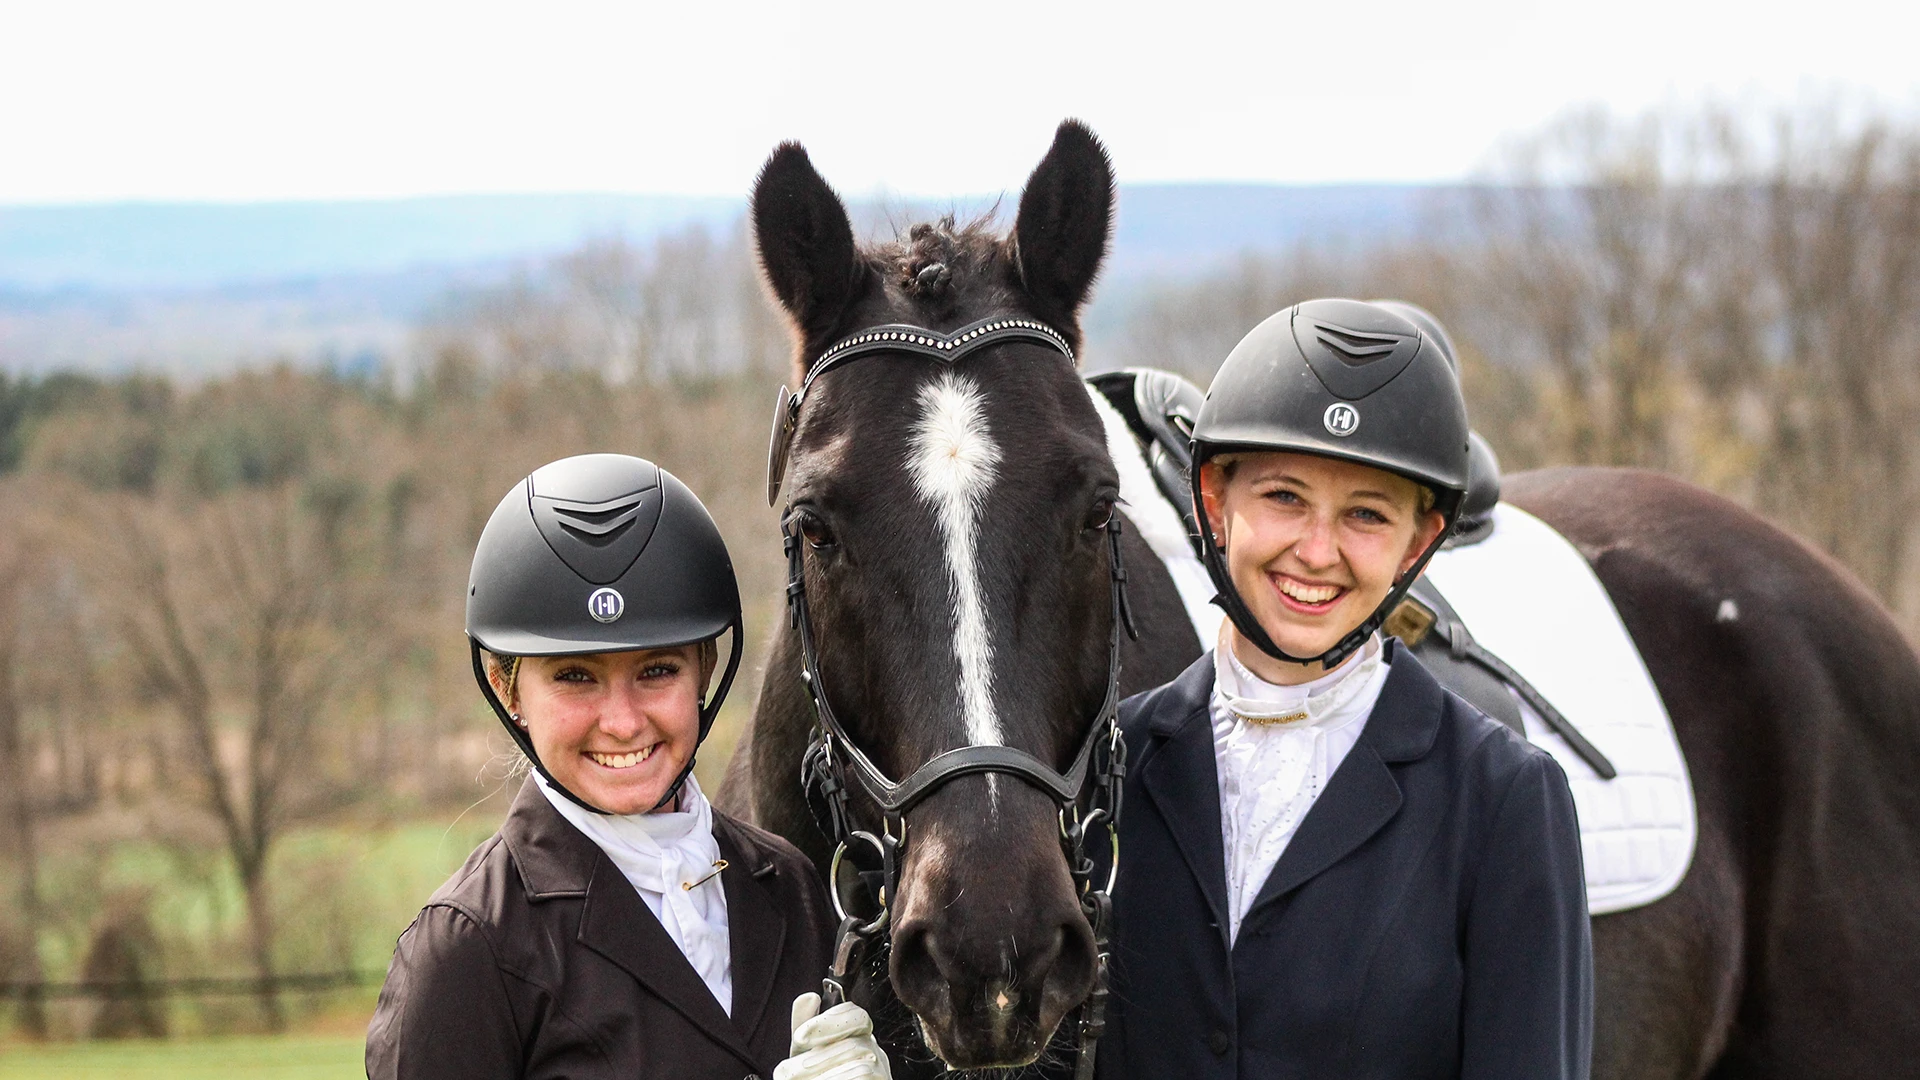 Two Houghton equestrian students with helmets and show clothes standing next to black lesson horse outside.